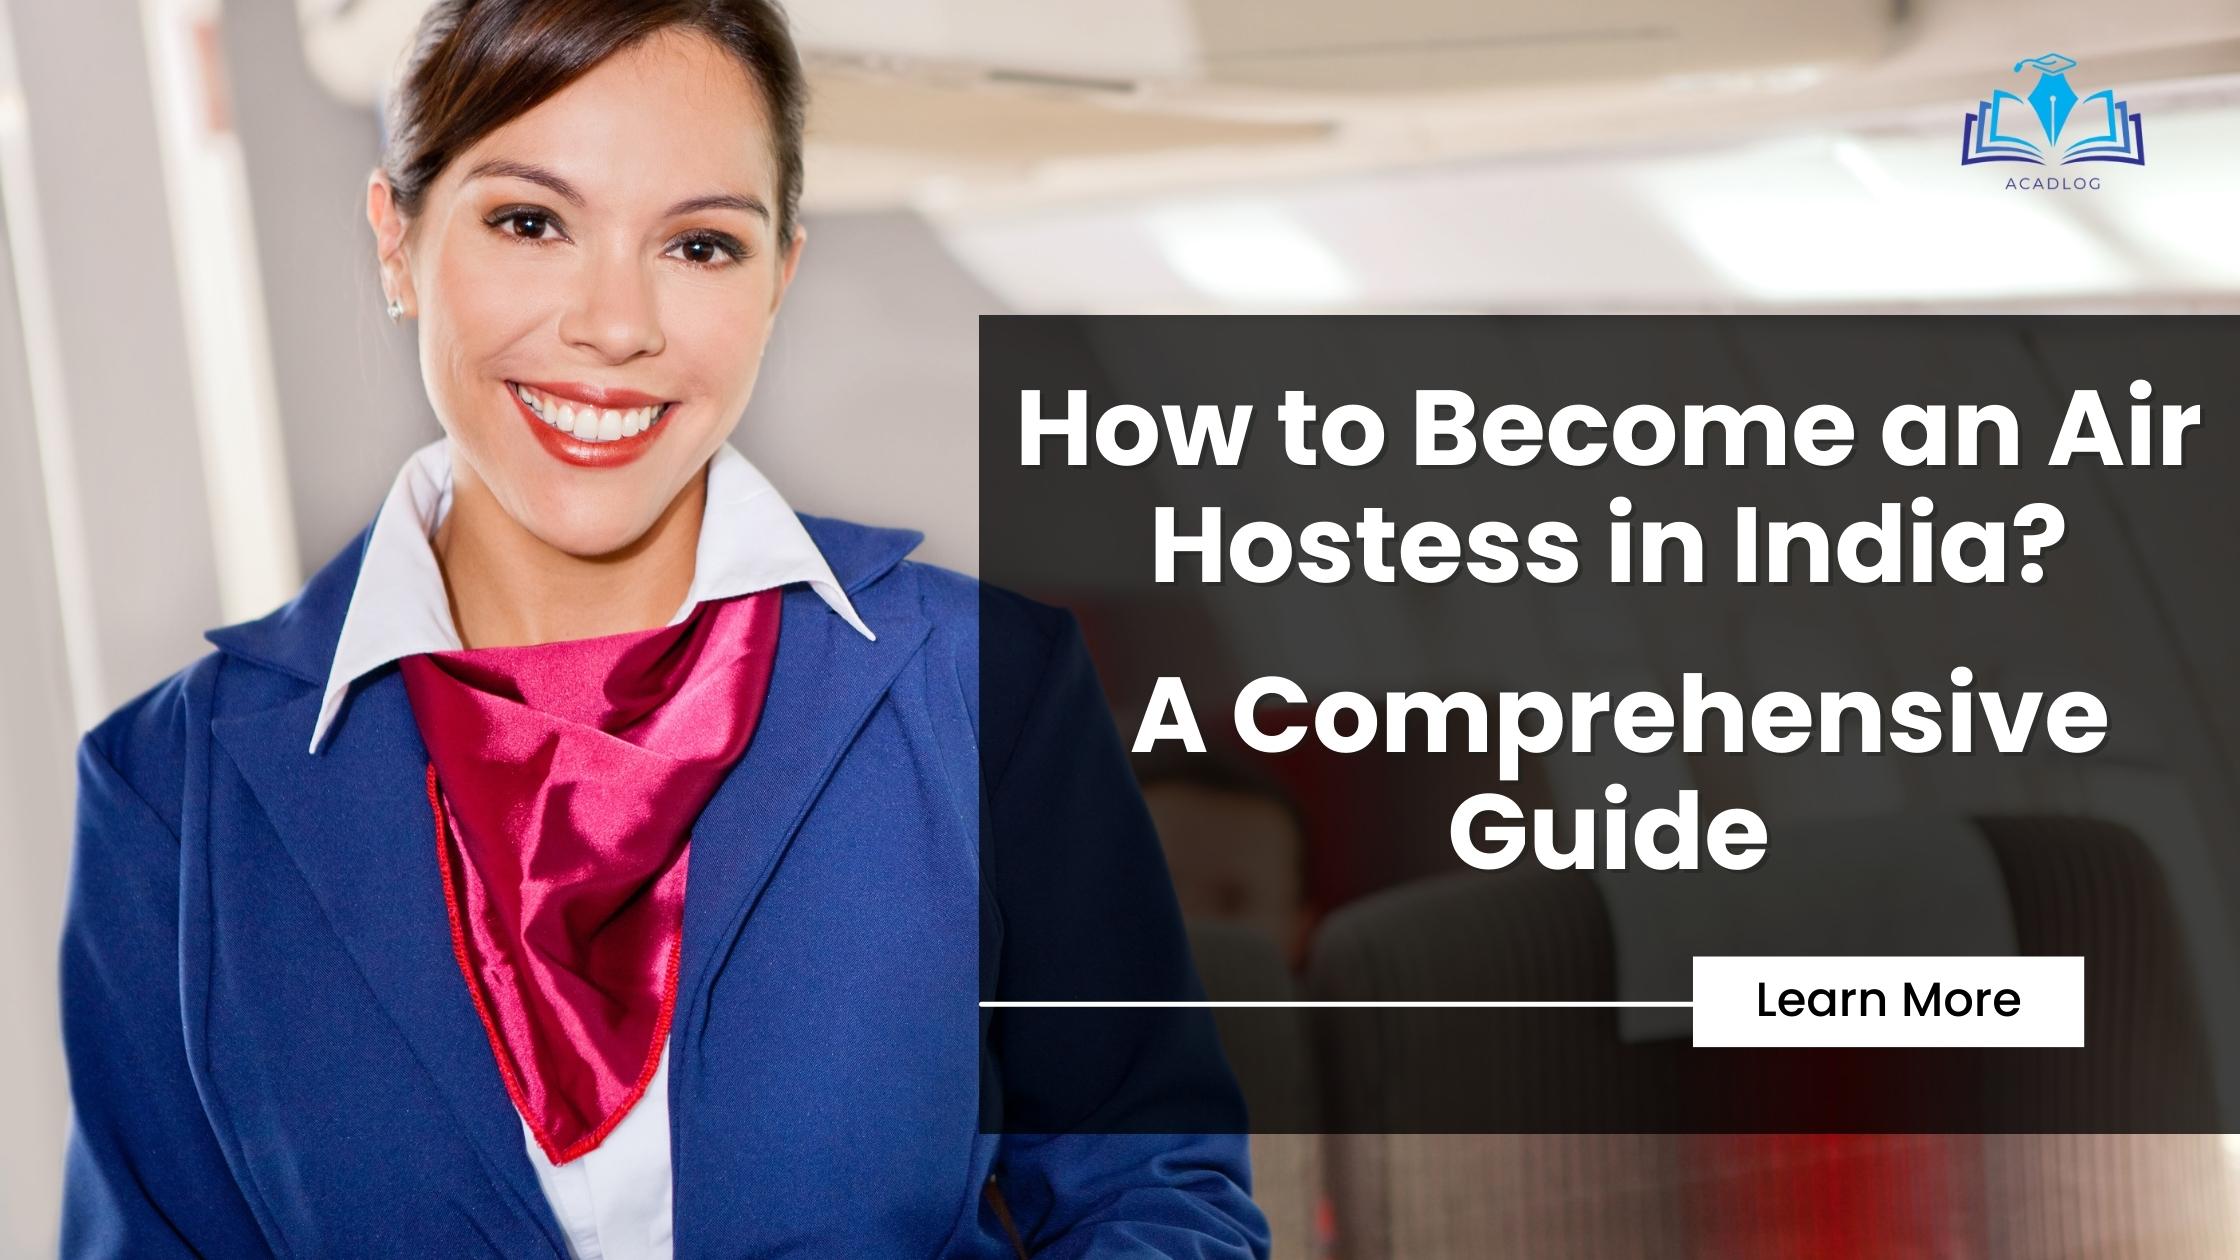 How to Become an Air Hostess in India